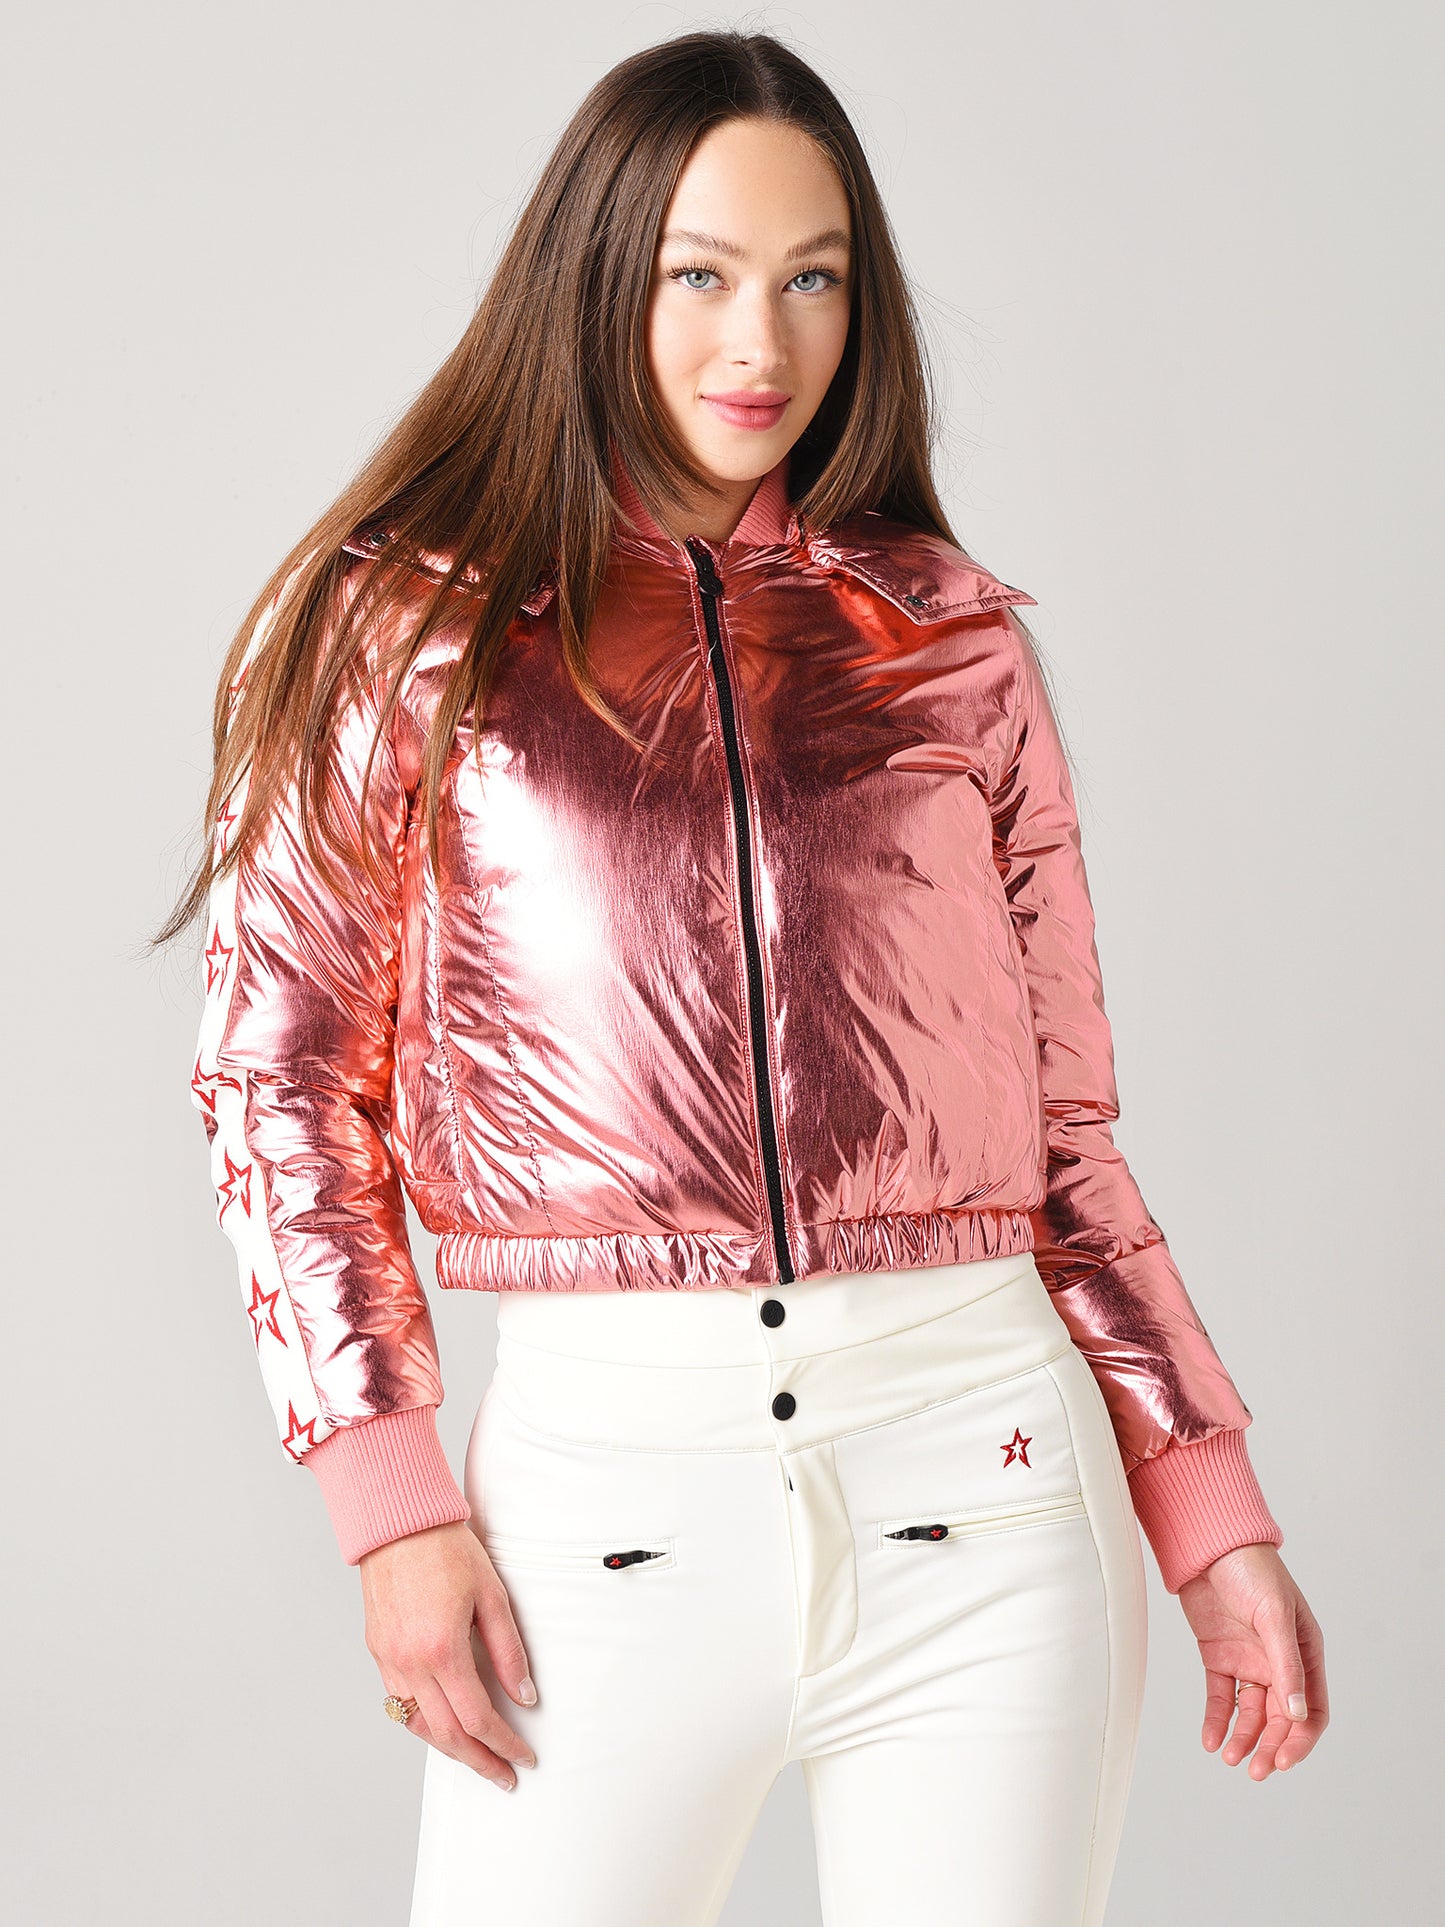 Perfect Moment Women's Star Jacket